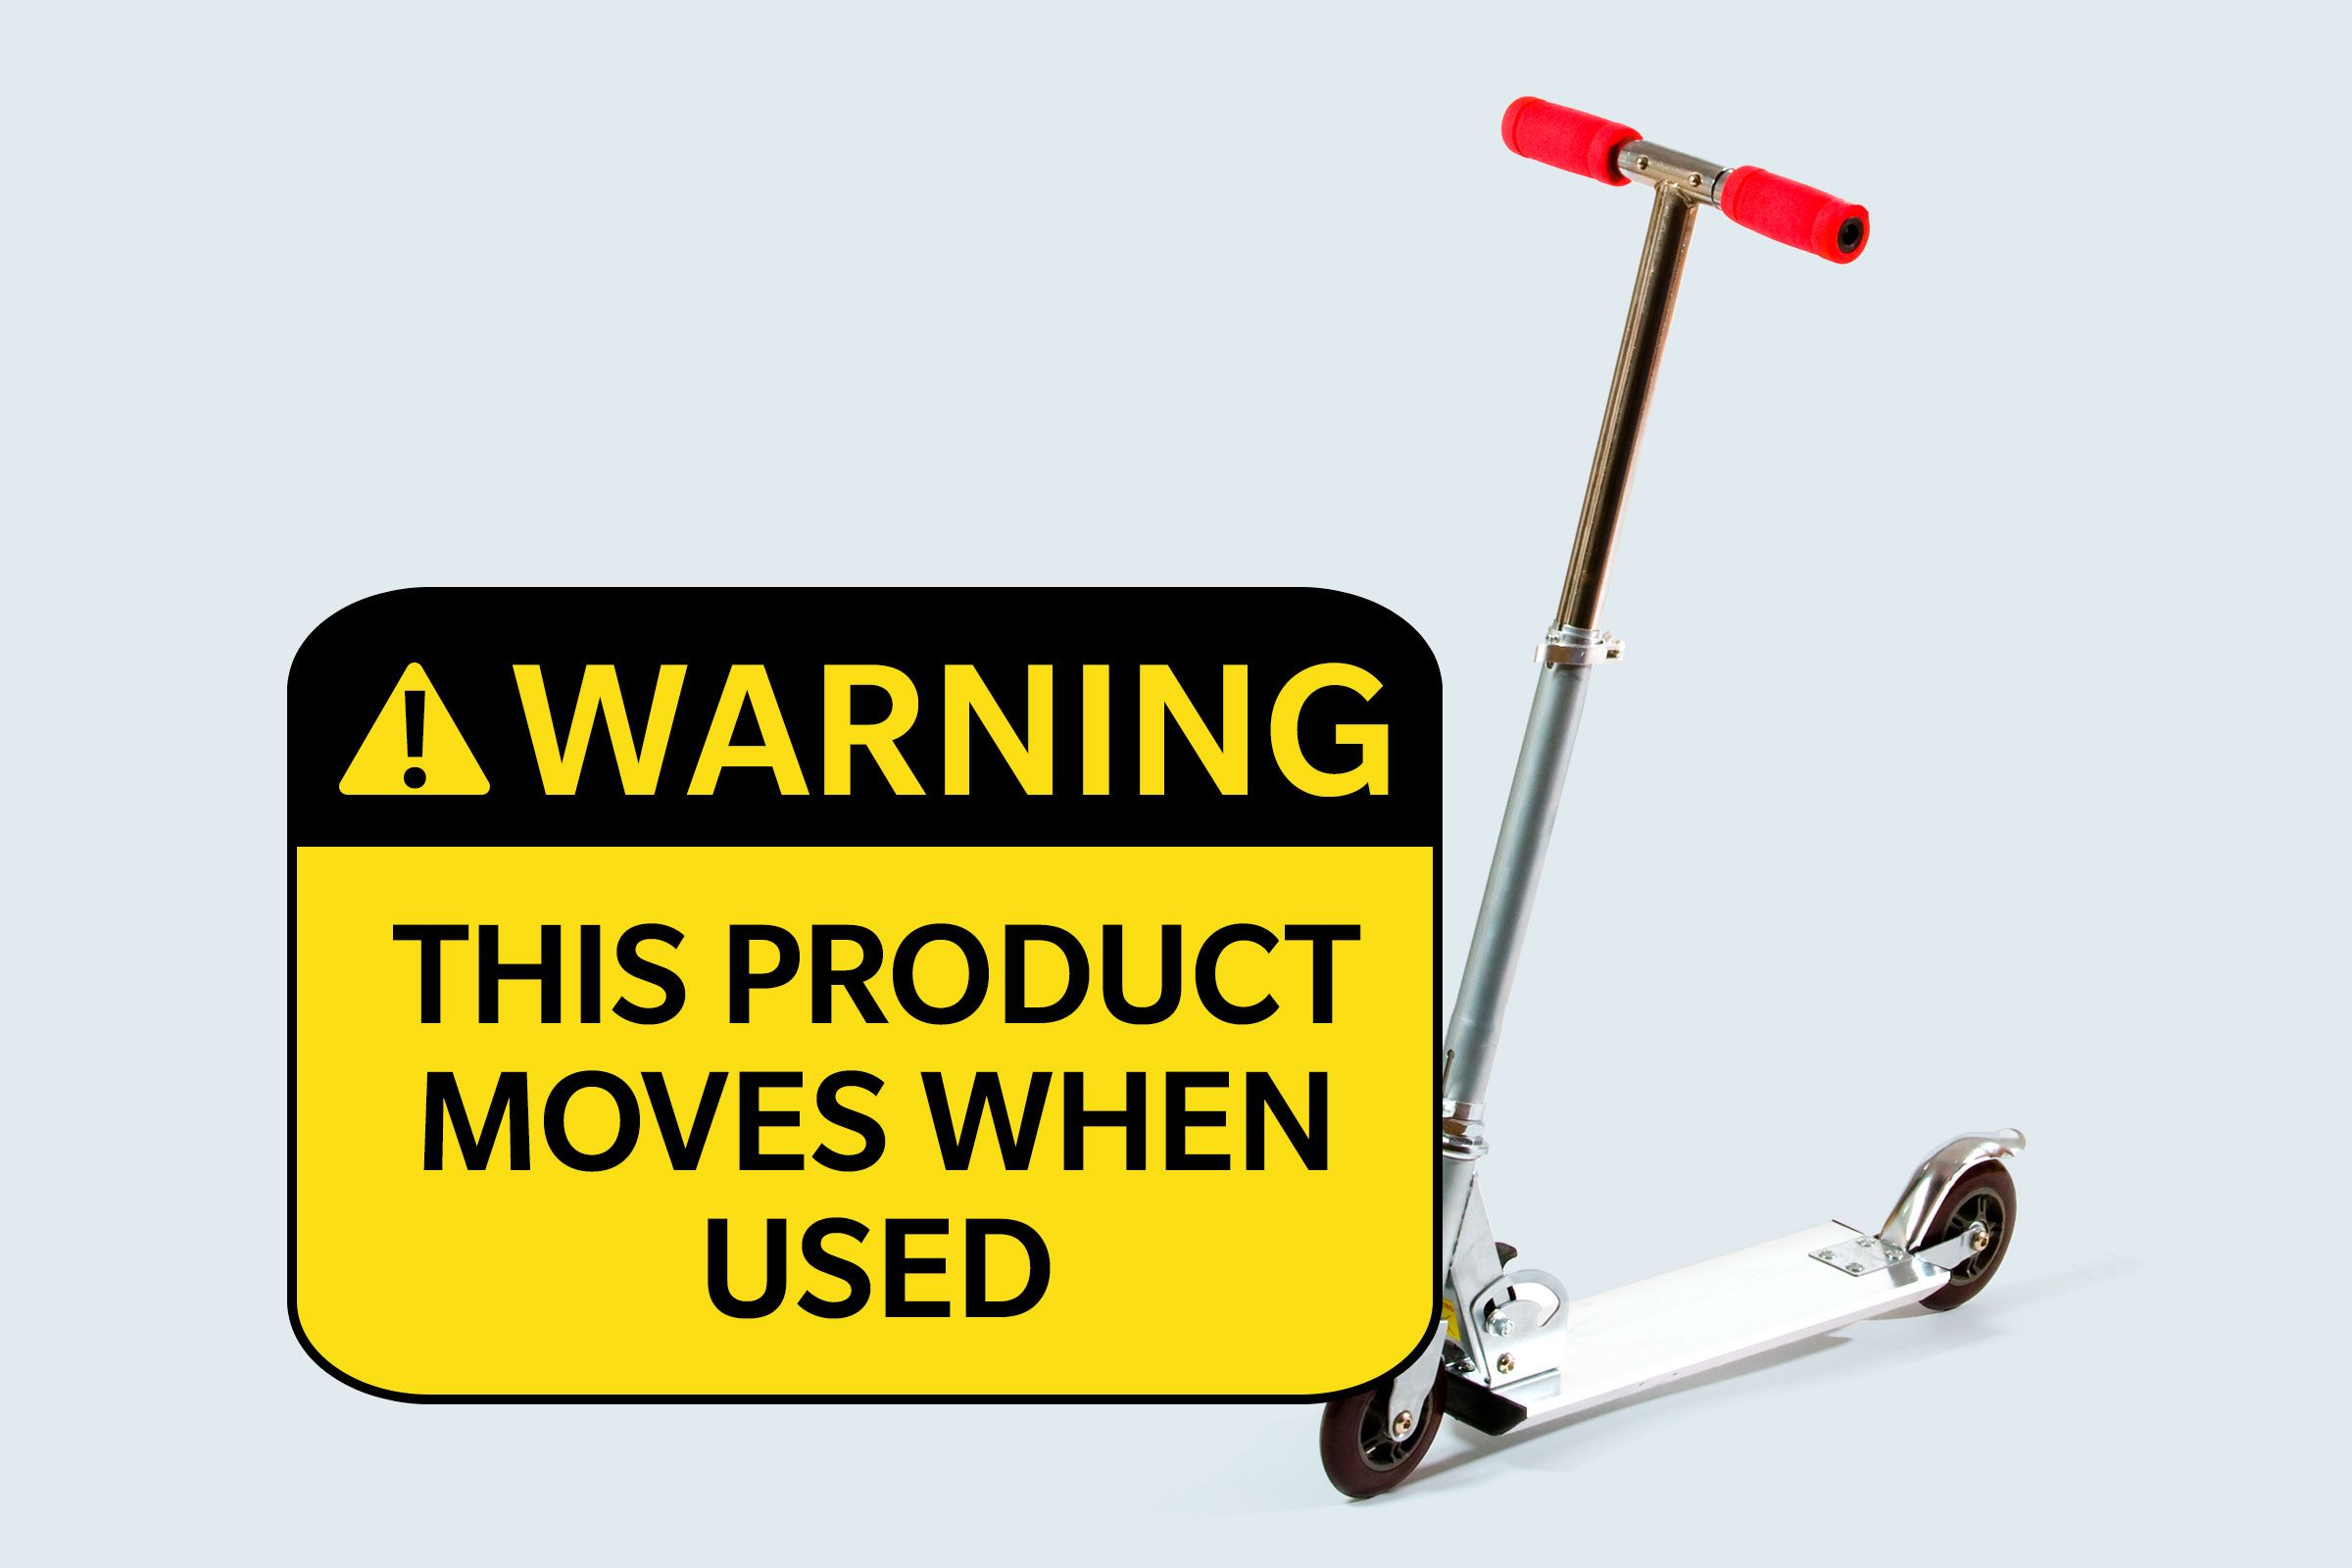 Warning on a product